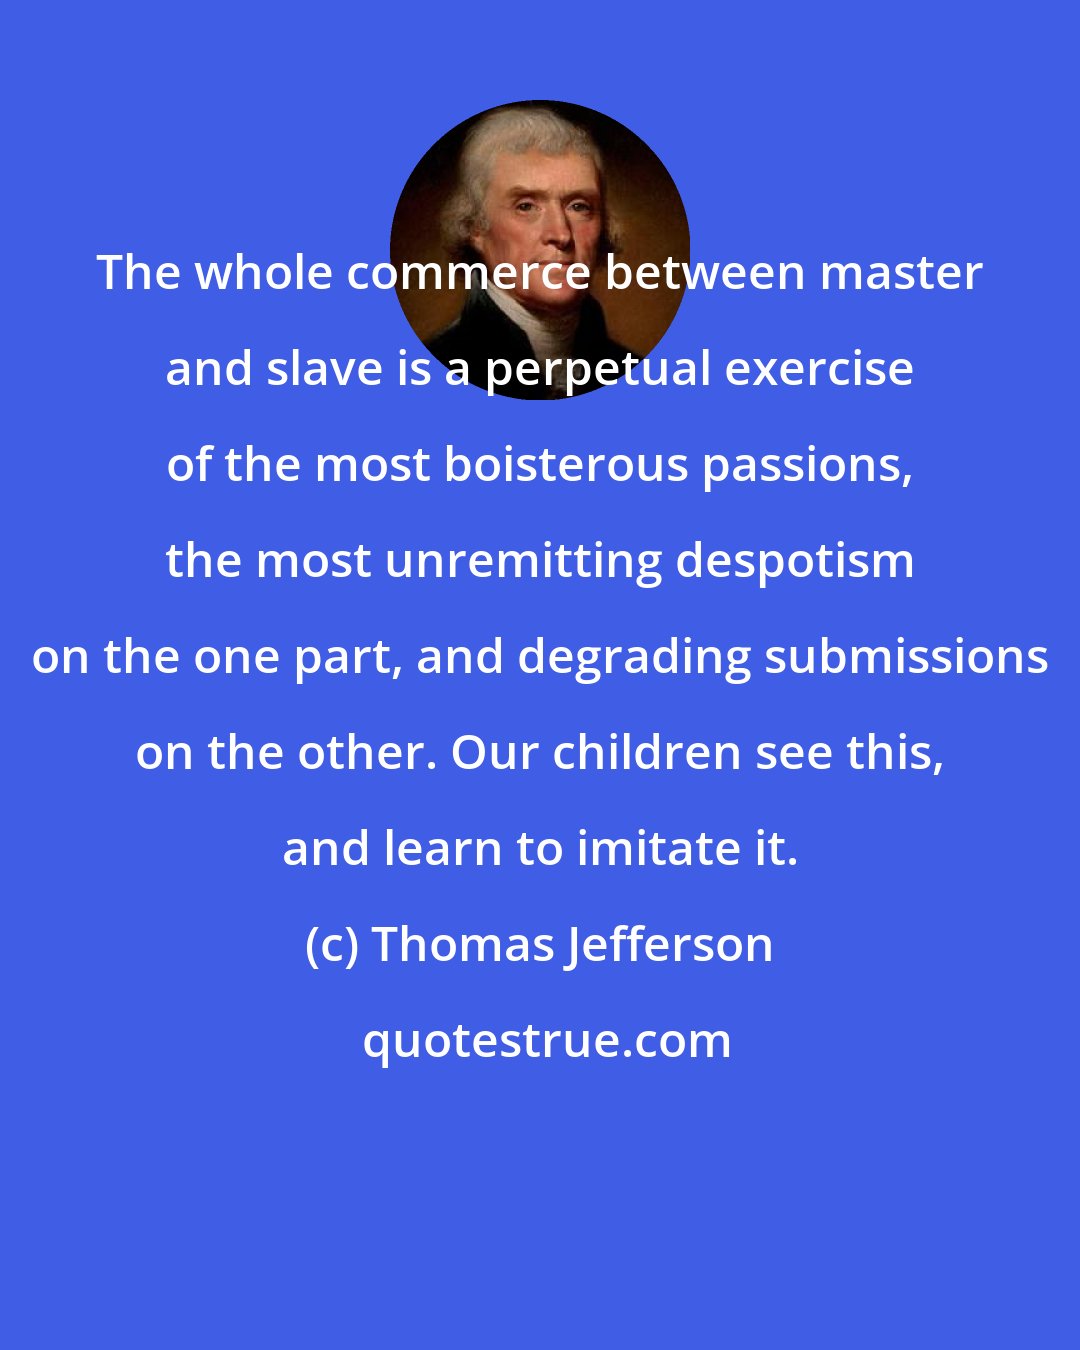 Thomas Jefferson: The whole commerce between master and slave is a perpetual exercise of the most boisterous passions, the most unremitting despotism on the one part, and degrading submissions on the other. Our children see this, and learn to imitate it.